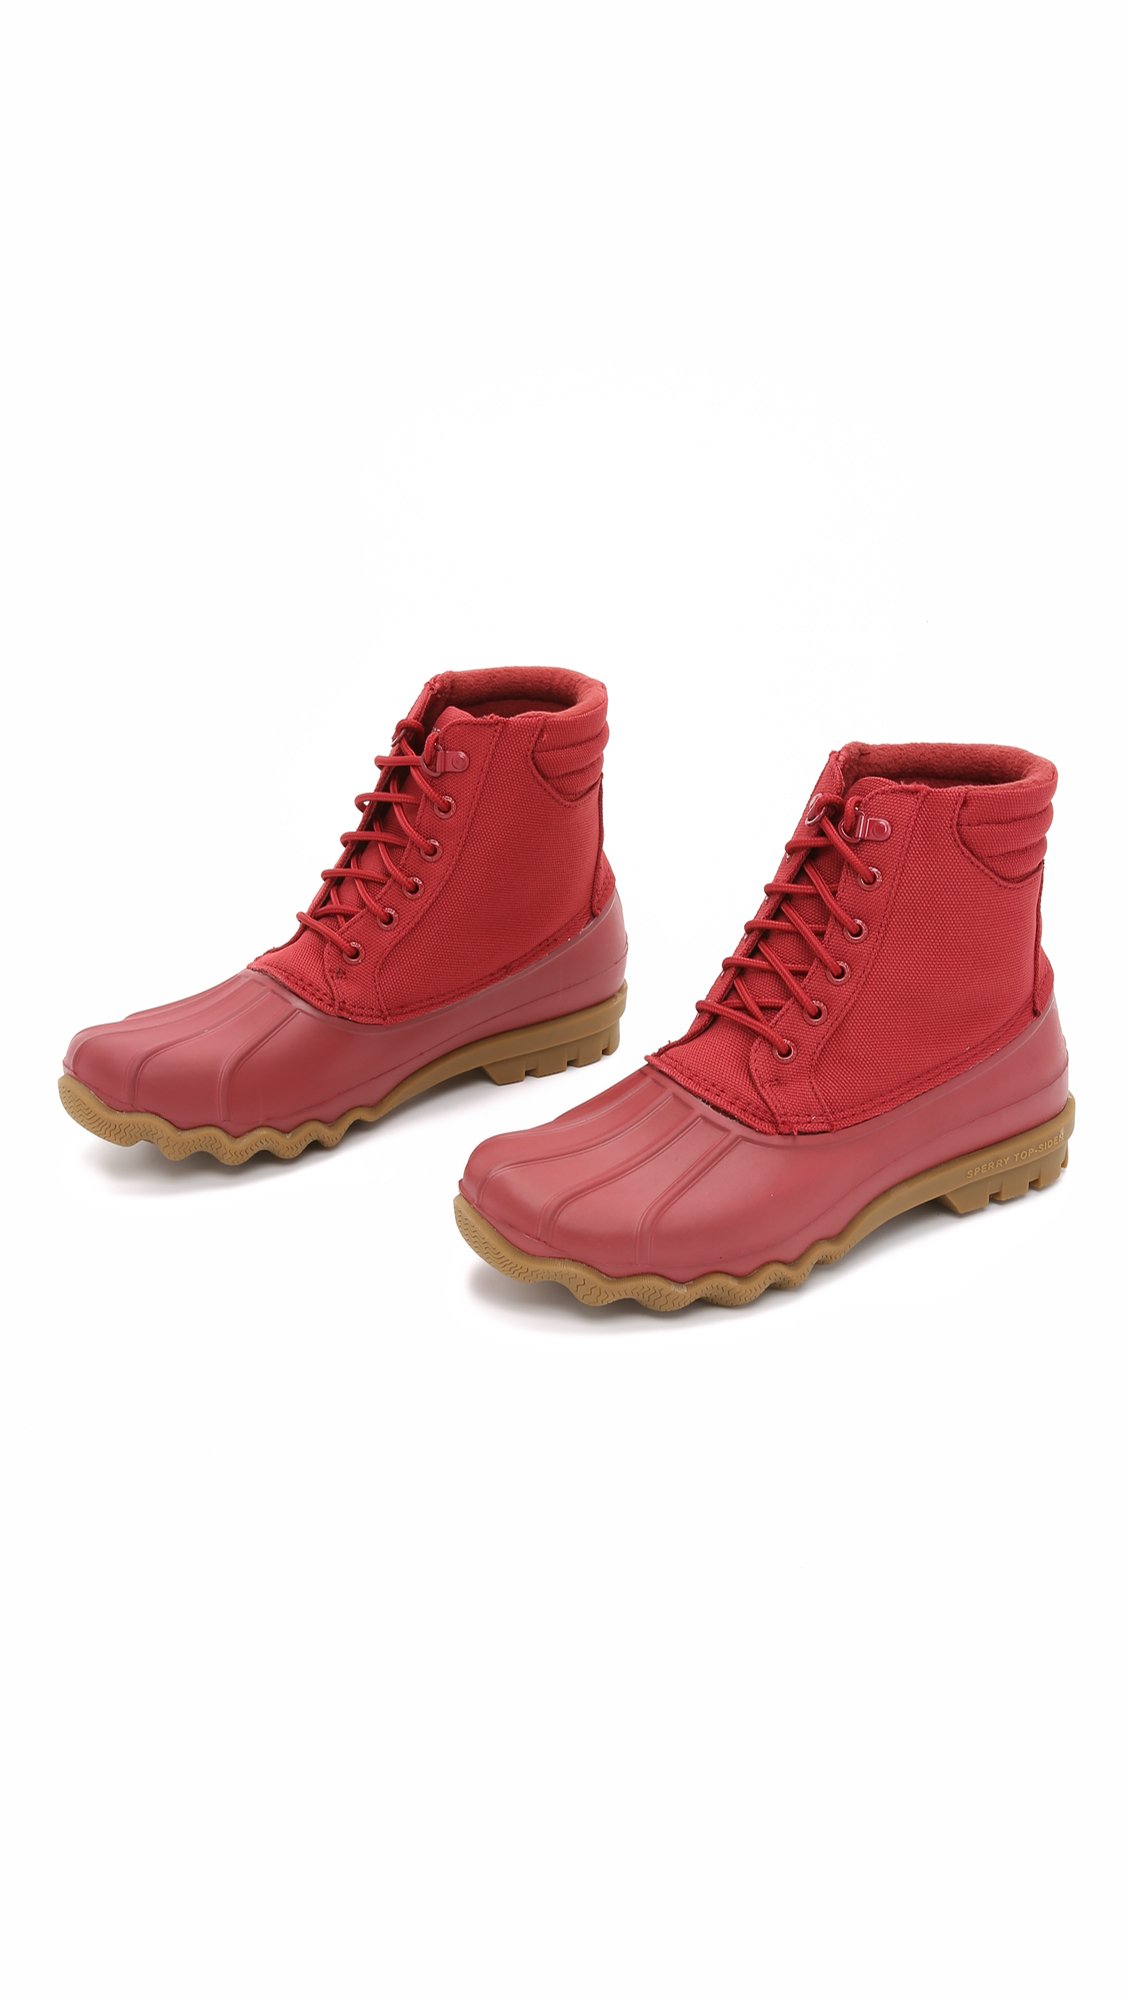 sperry boots red